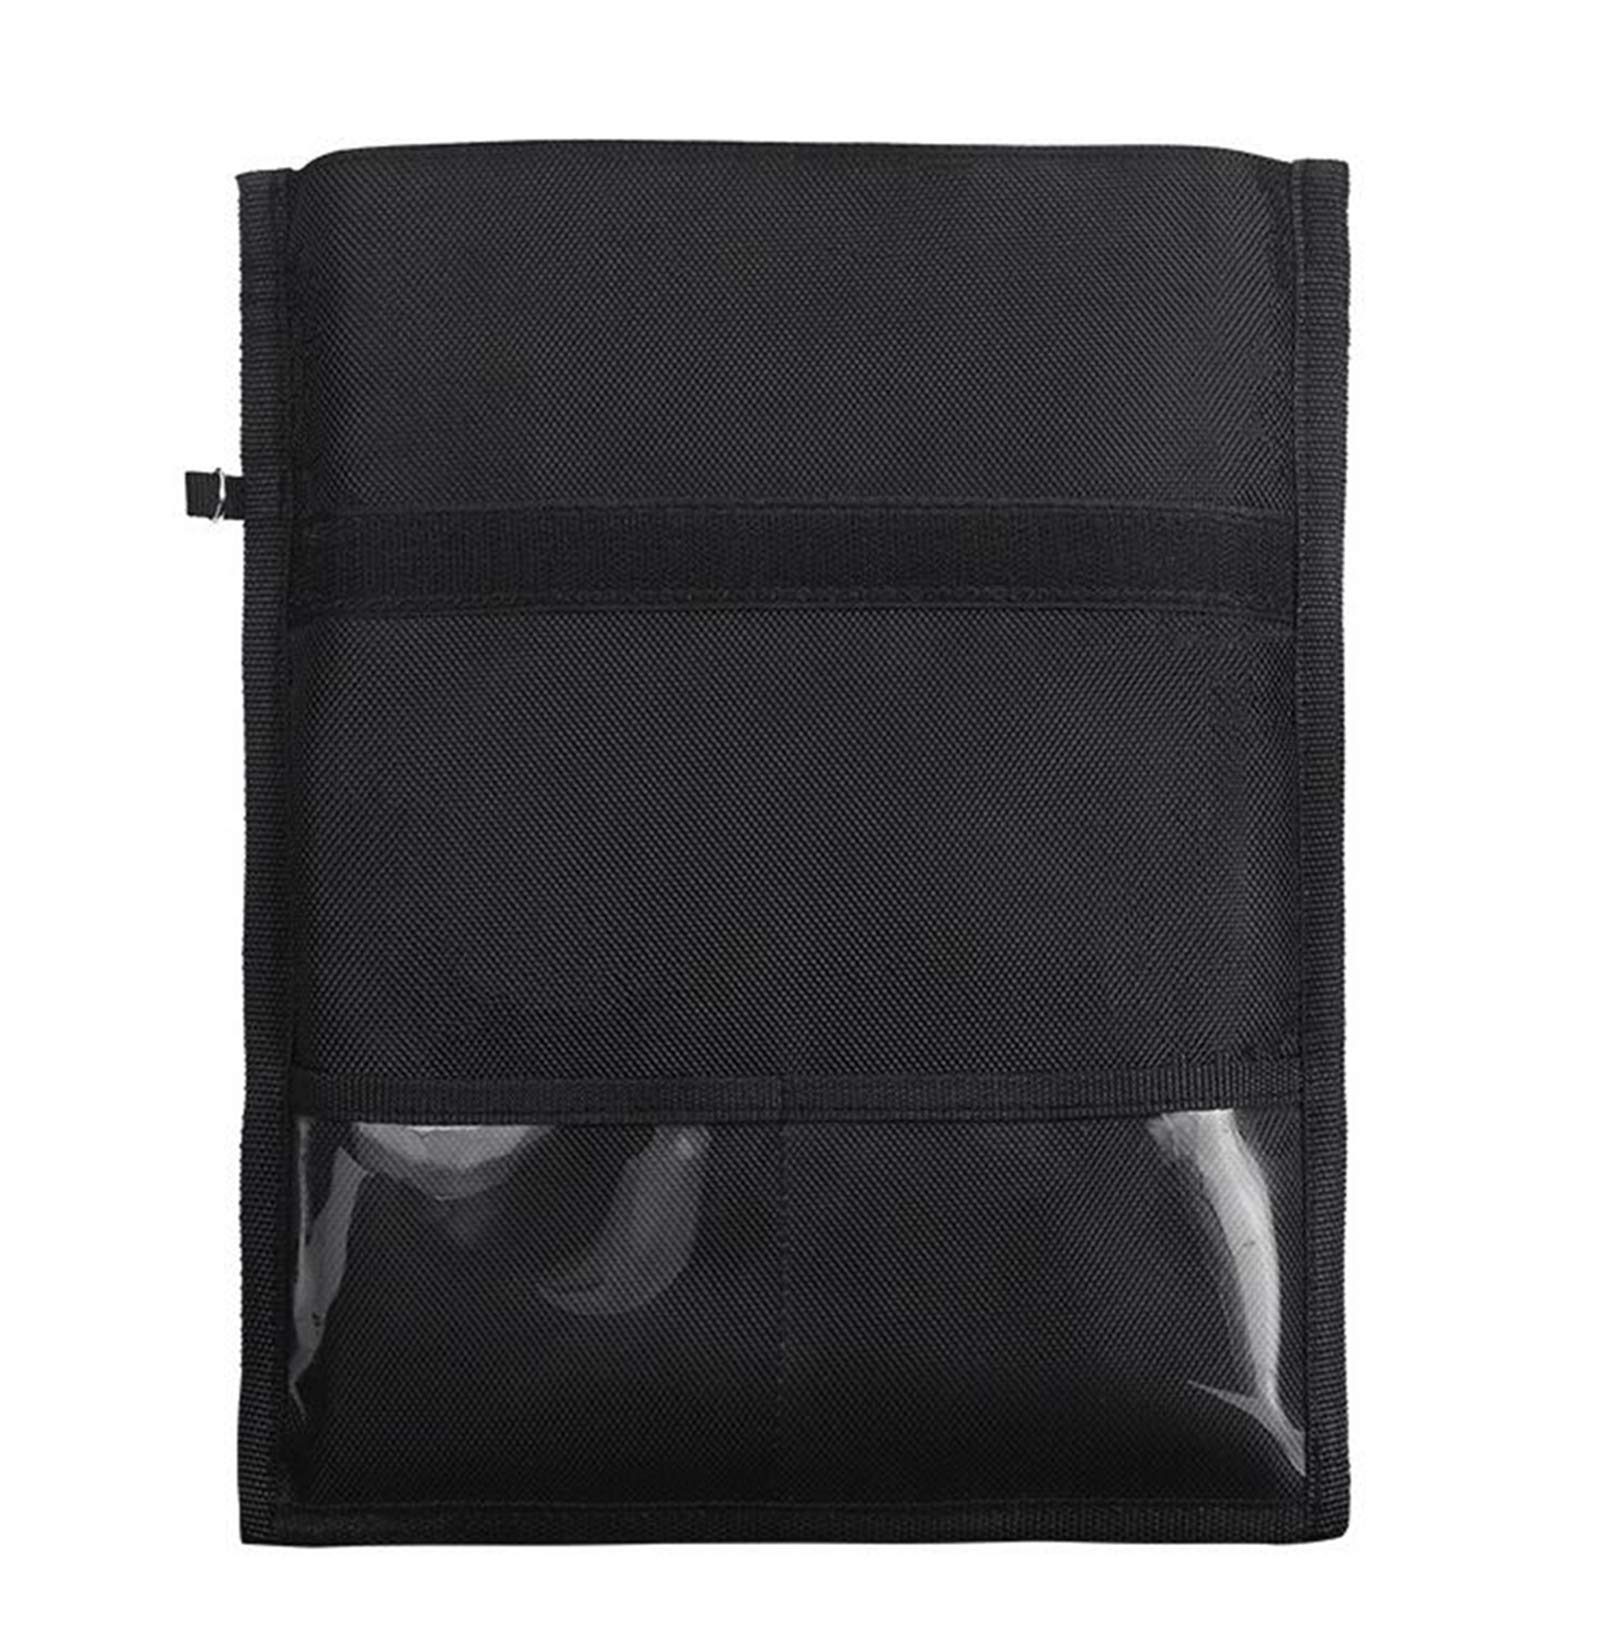 Amradield Faraday Bag Tablet Sleeve for iPad and Phones - Device Shielding for Law Enforcement, Military, Executive Privacy, Travel & Data Security, Anti-Hacking & Anti-Tracking Assurance